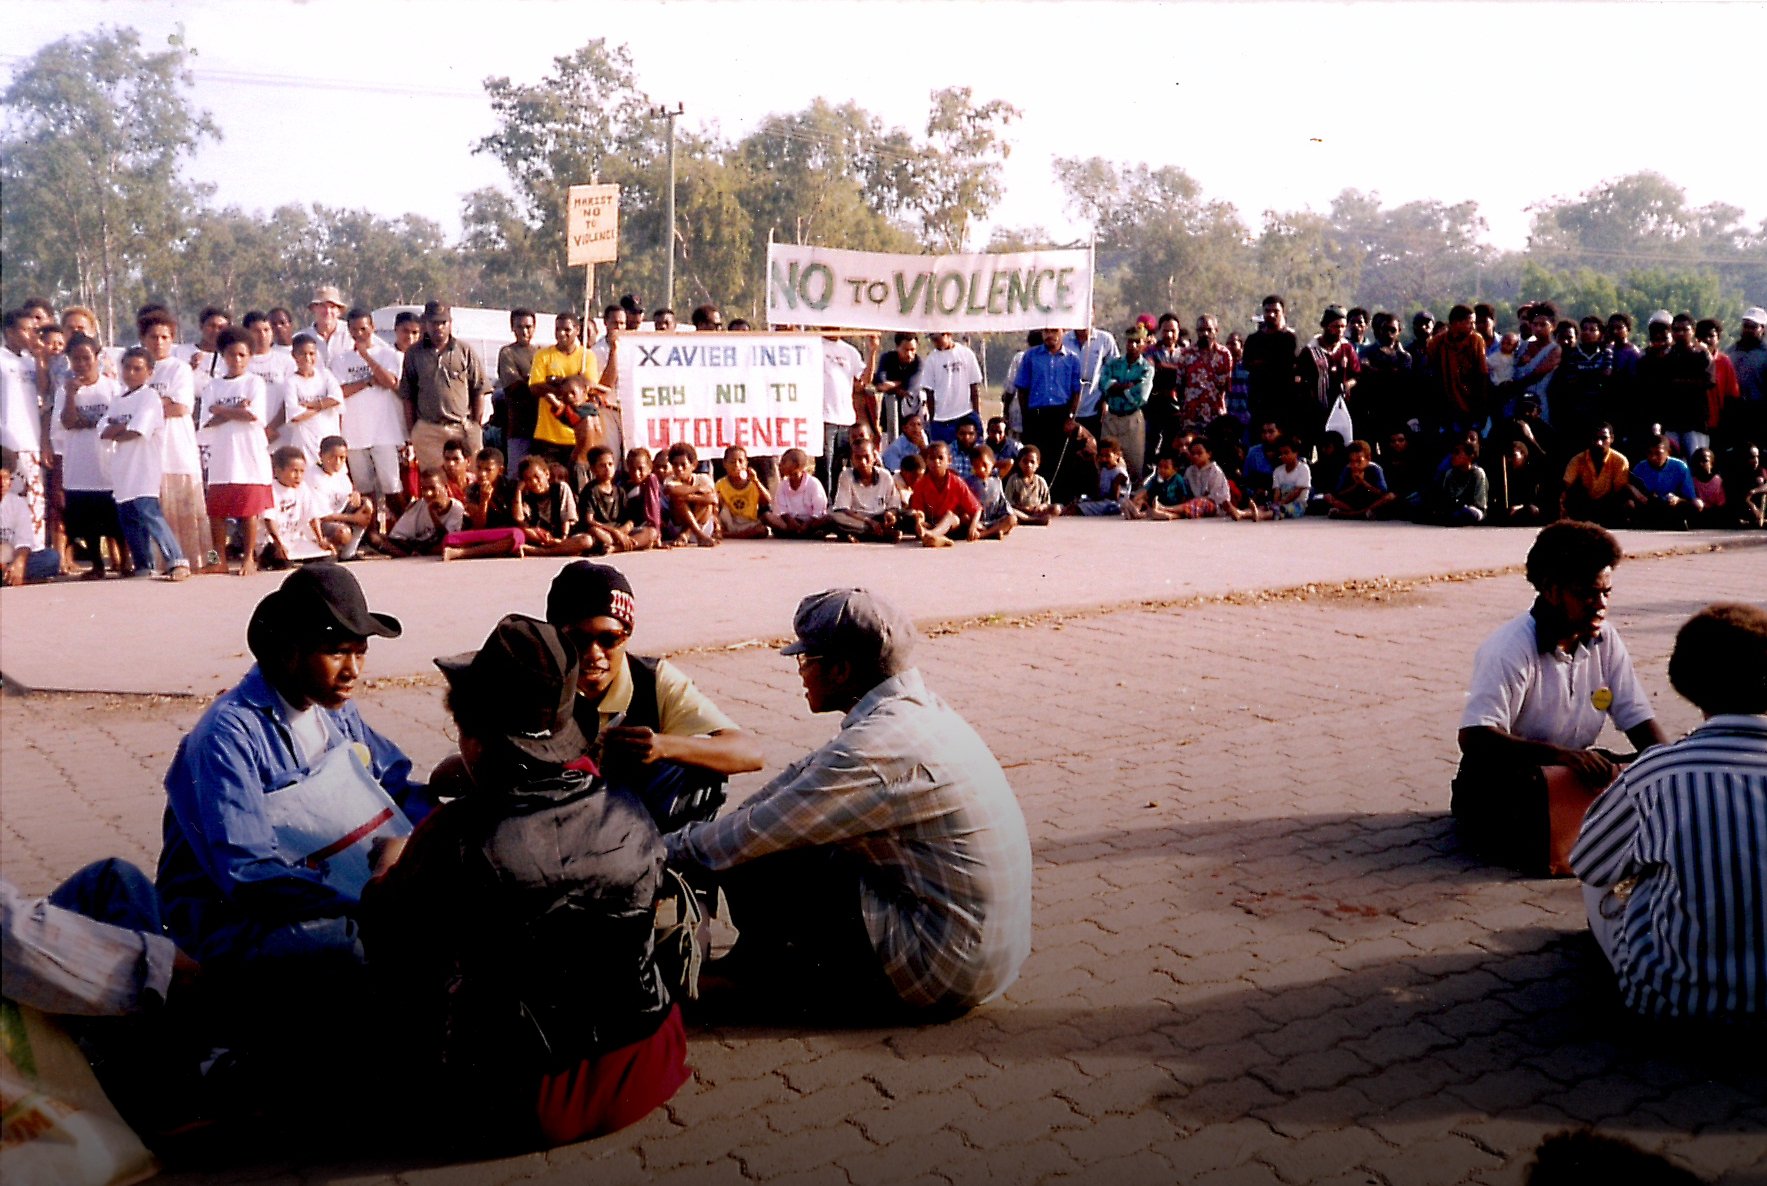 Anti-violence demonstration in Port Moresby, Papua 2001